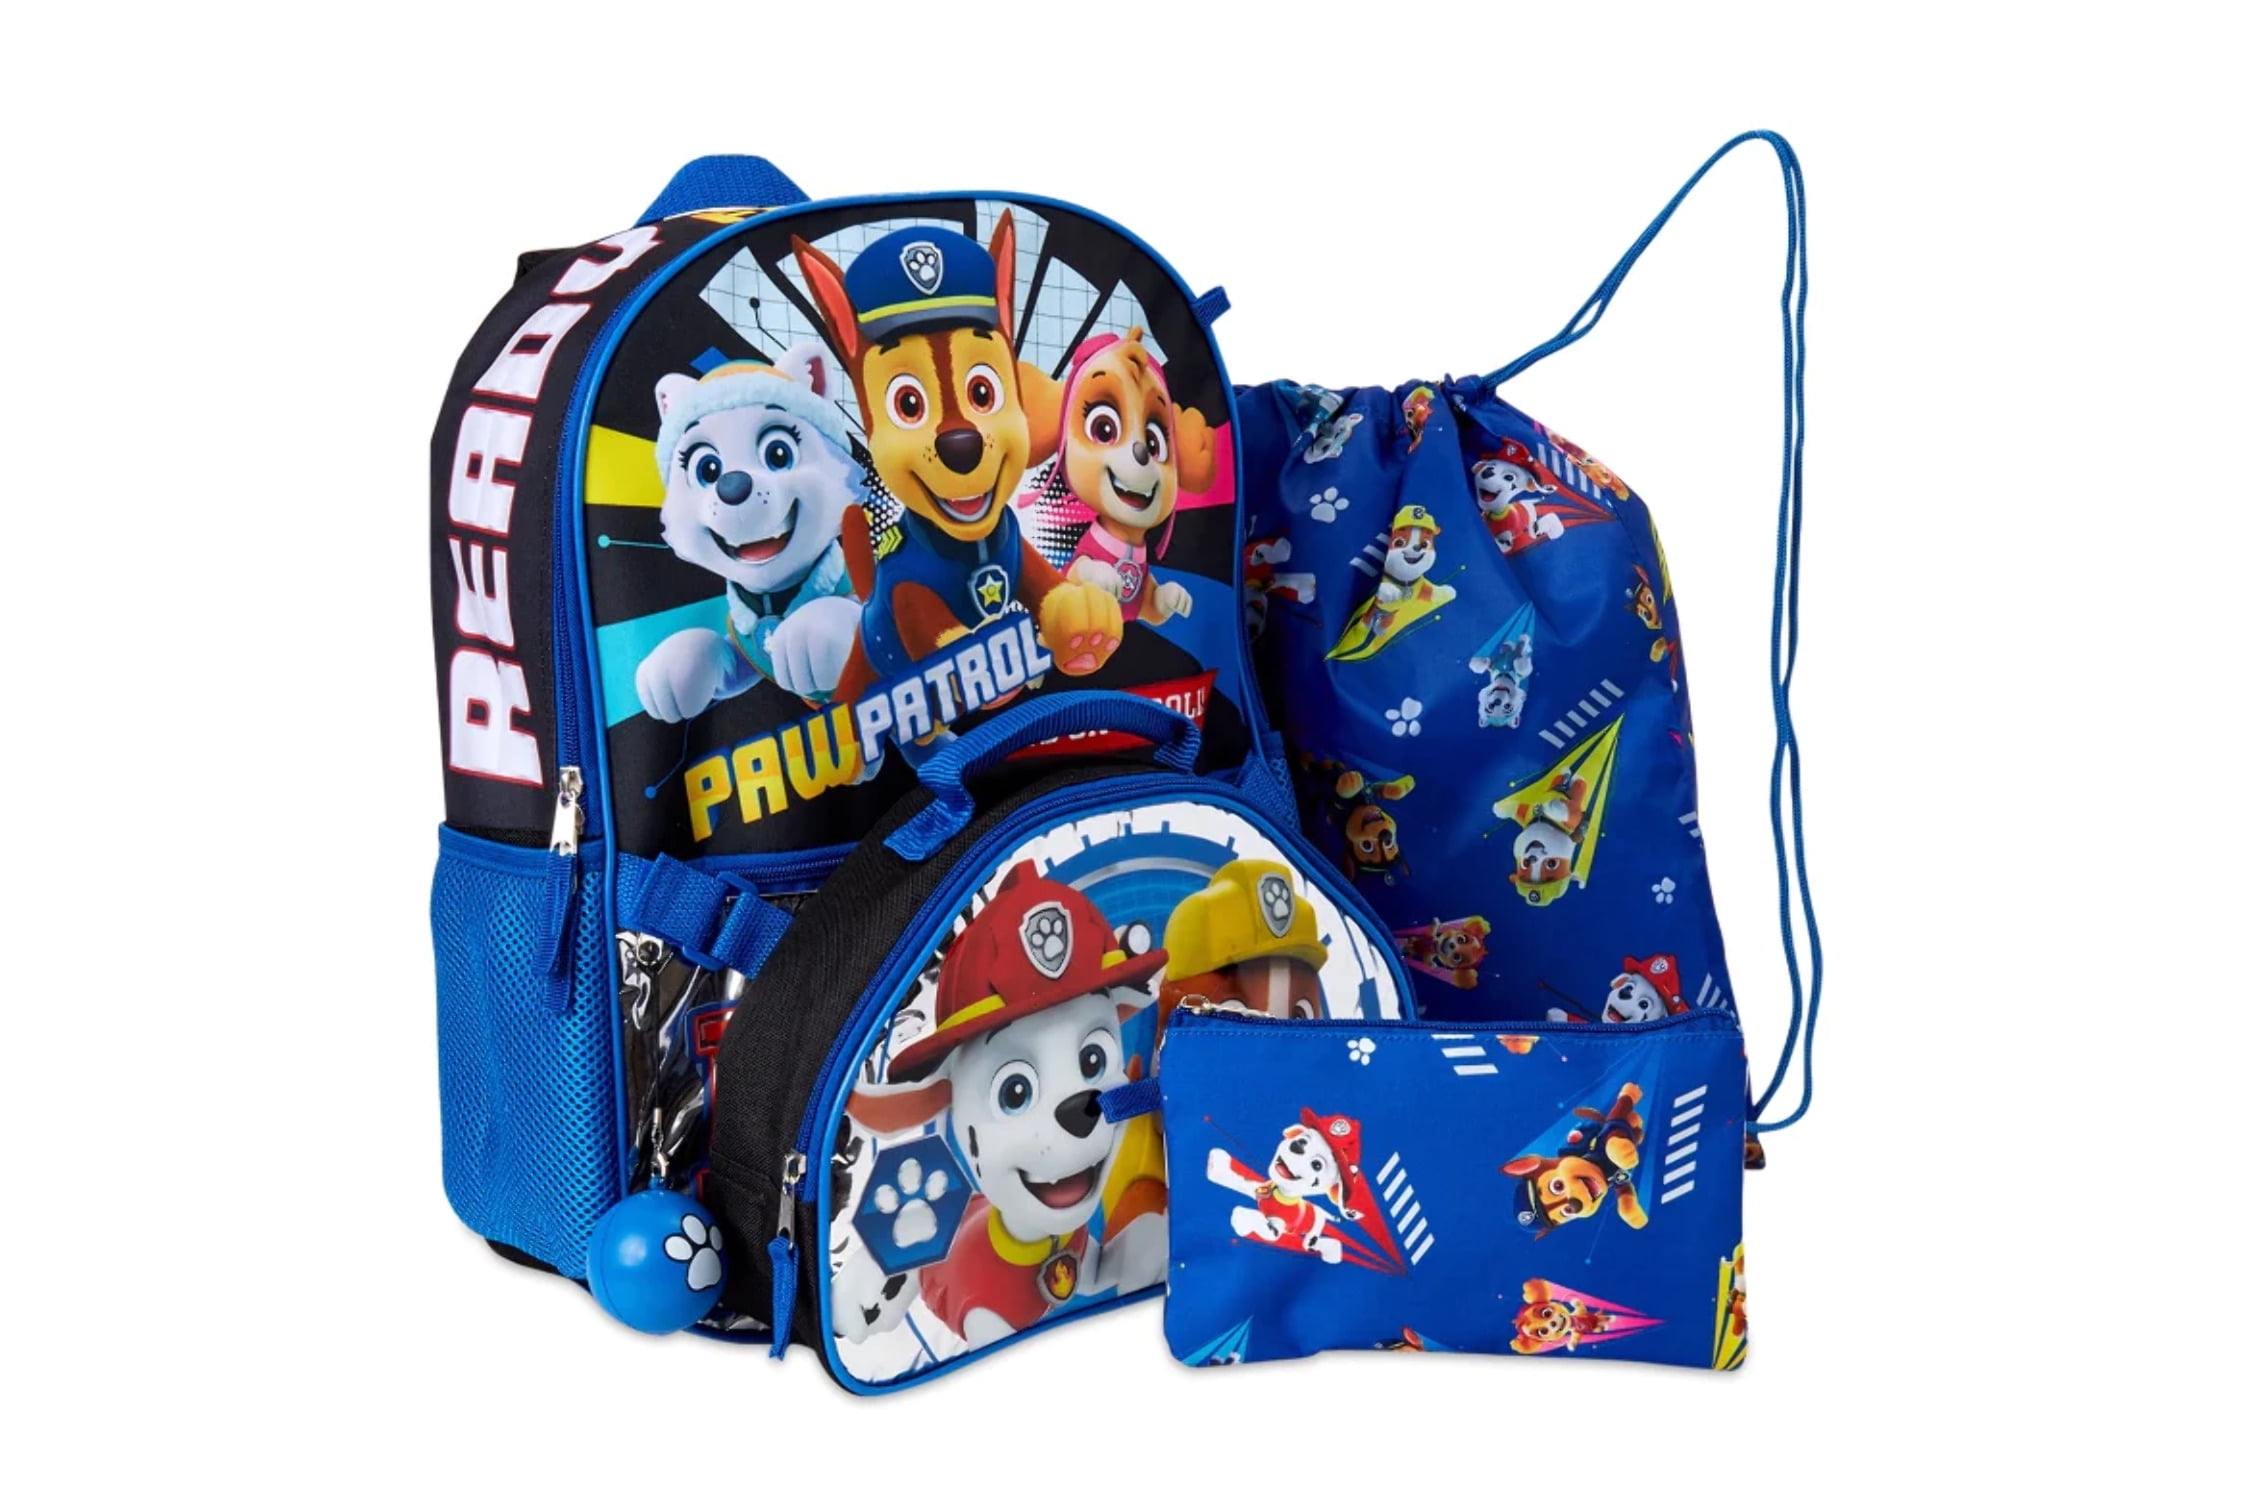 Paw Patrol Action Pack 5 Piece Backpack Set